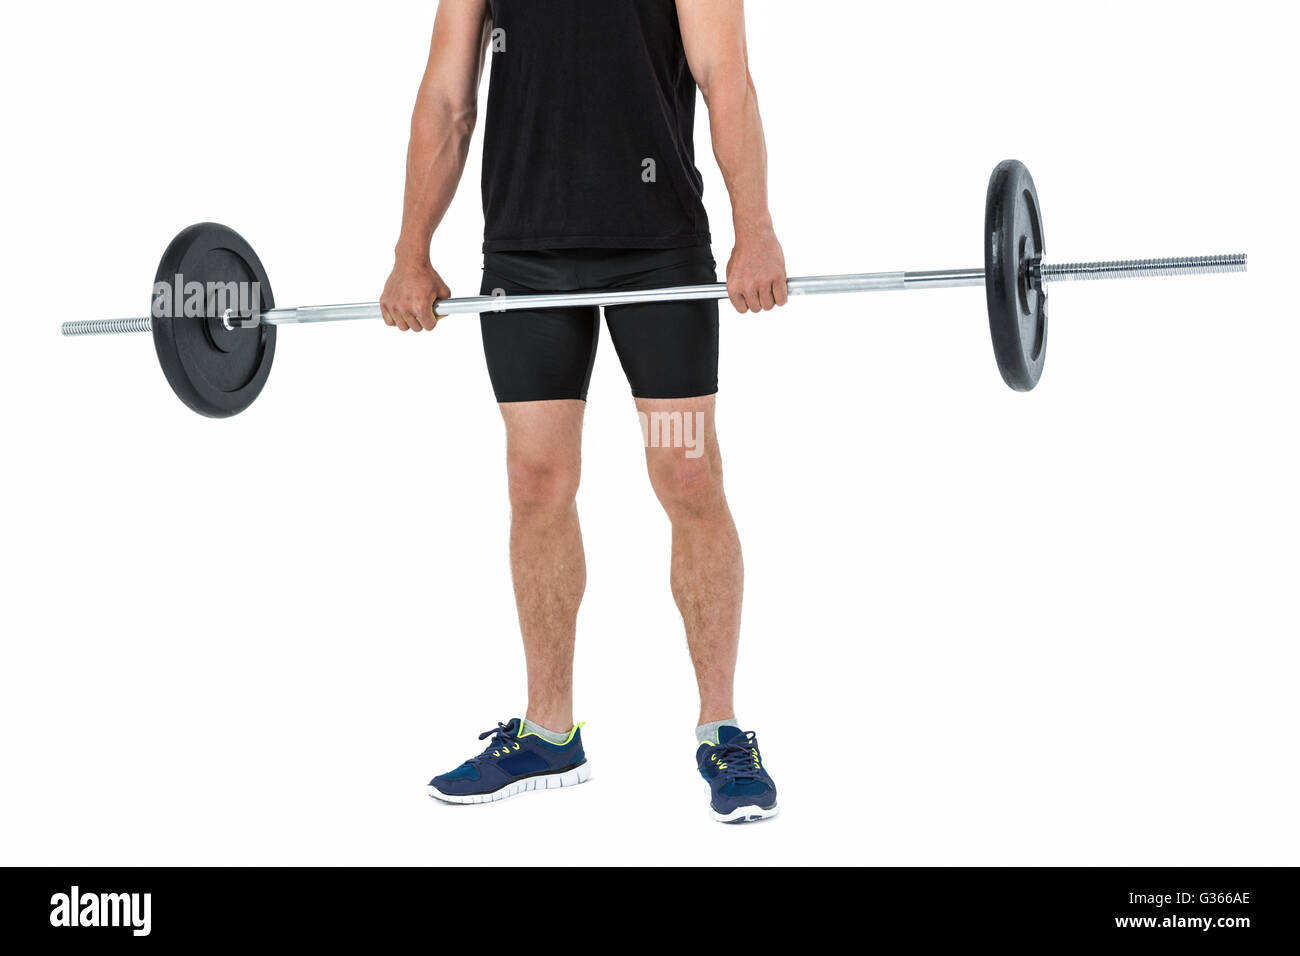 Bodybuilder lifting heavy barbell weights Stock Photo